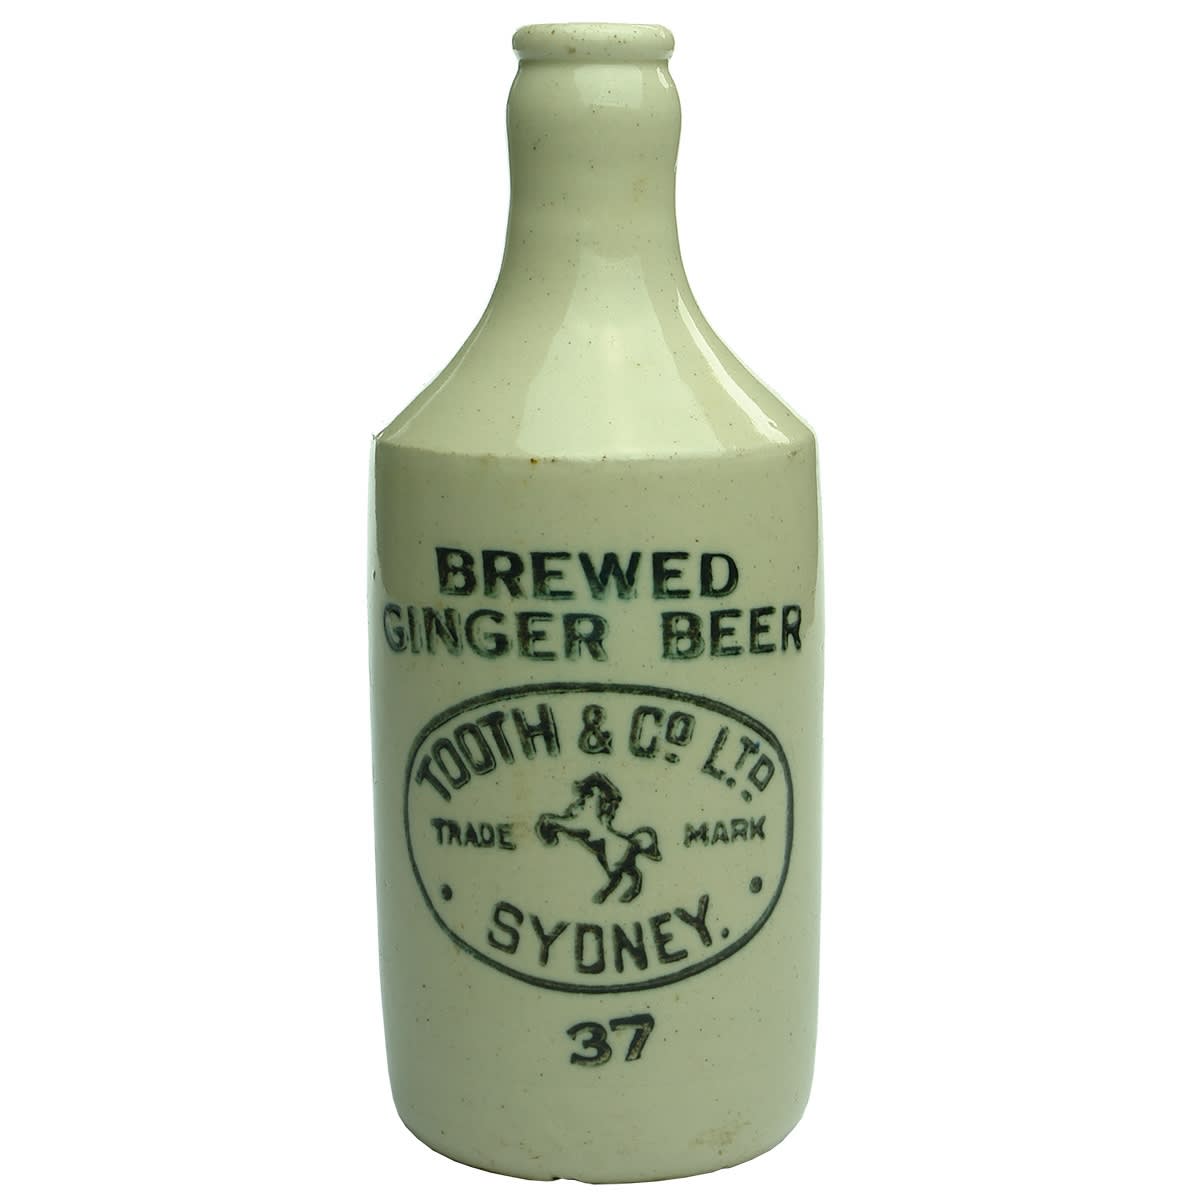 Ginger Beer. Tooth & Co Ltd Sydney. All White Crown Seal. 37. (New South Wales)